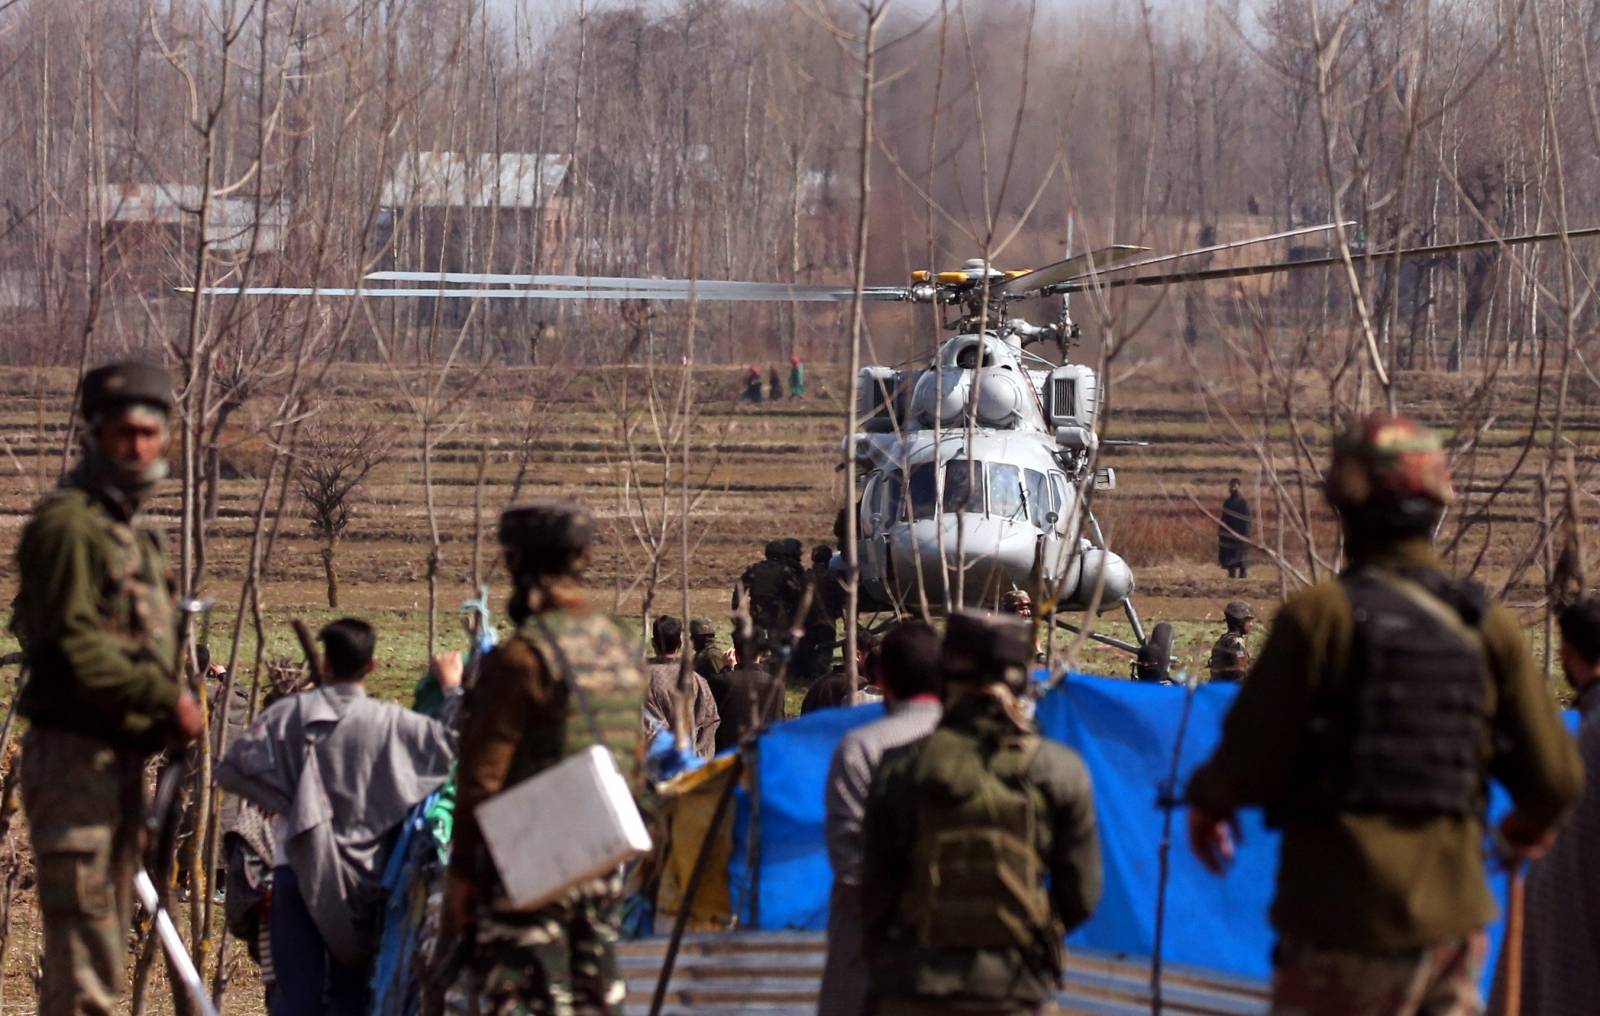 An Indian Air Force chopper lands as soldiers stand at the site after Indian Air Force's helicopter crashed in Budgam